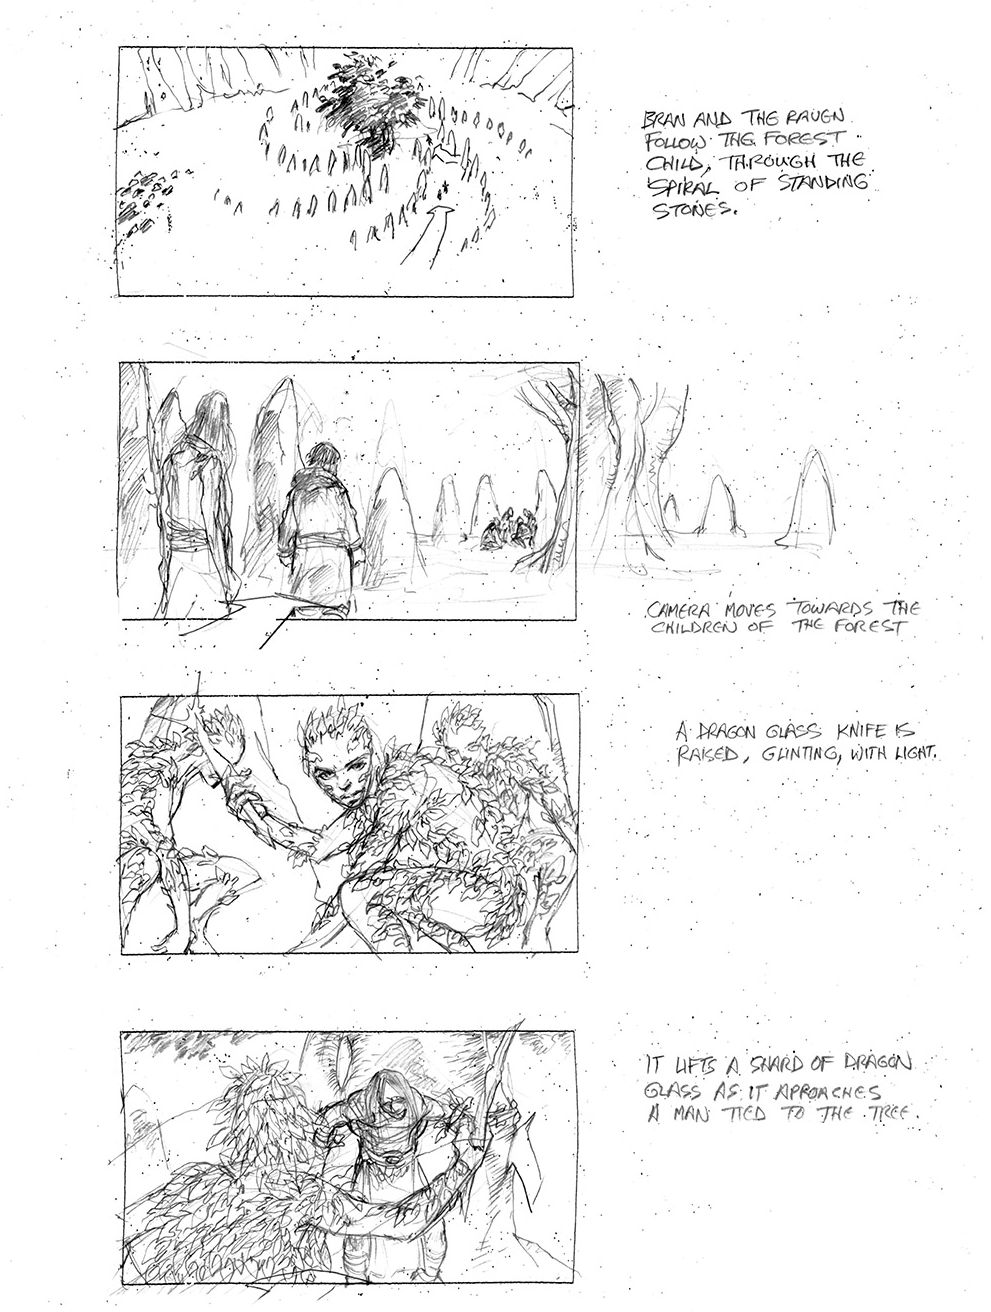 The origin of the White Walkers storyboard 1